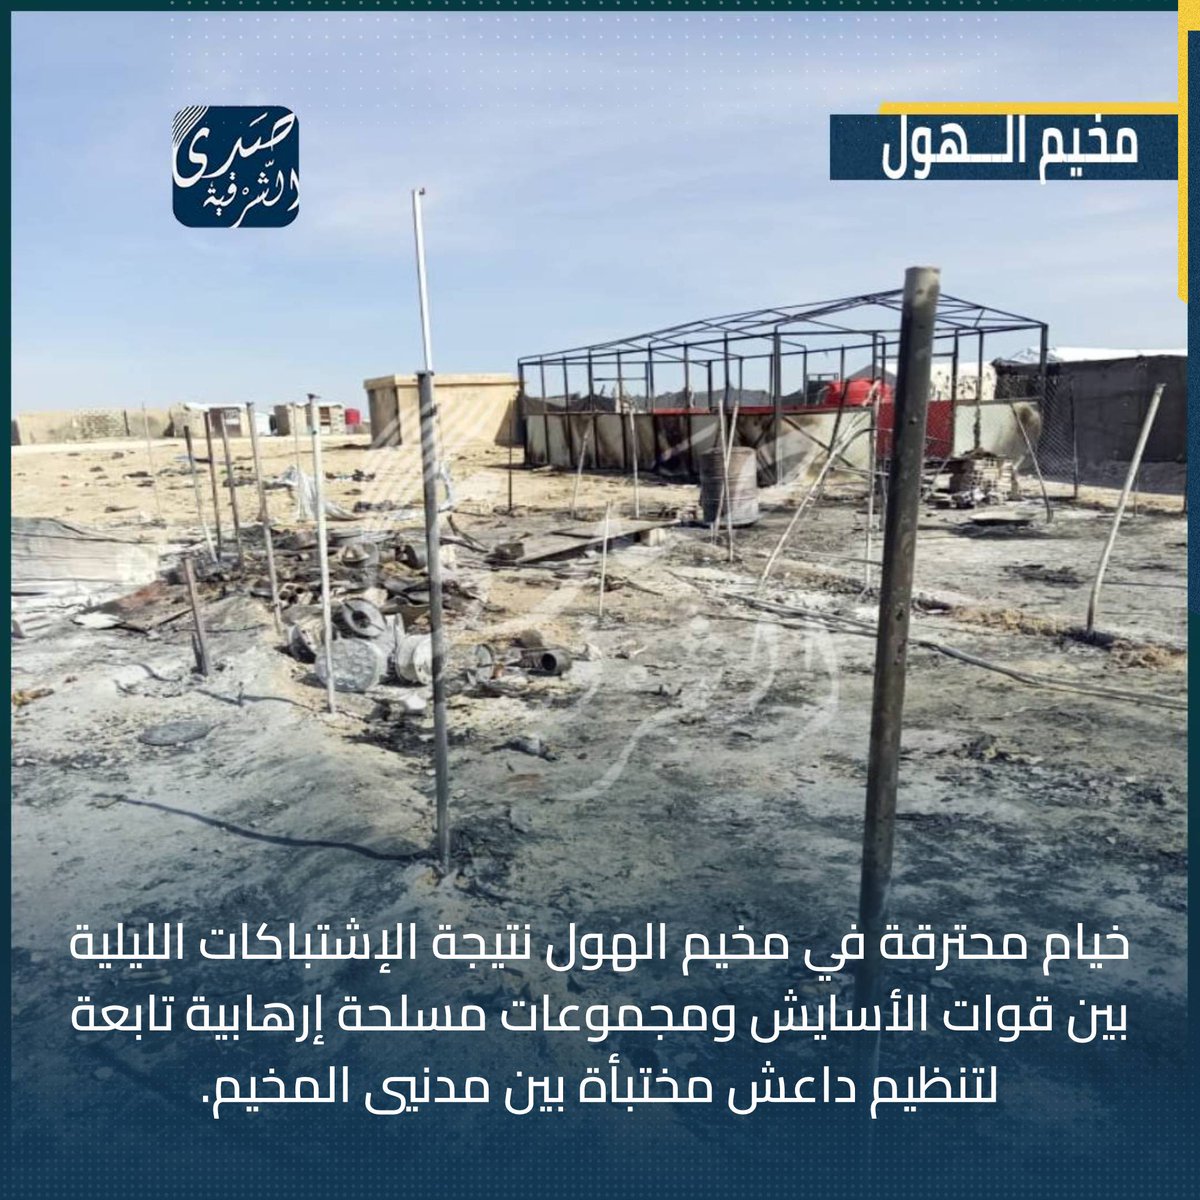 Sada Al-Sharqiya obtained a special photo of the burned tents as a result of last night's events in Al-Hol camp in Al-Hasakah countryside. Burned tents as a result of the clashes between armed groups affiliated with the terrorist organization ISIS and the Asayish forces responsible for protecting the camp.